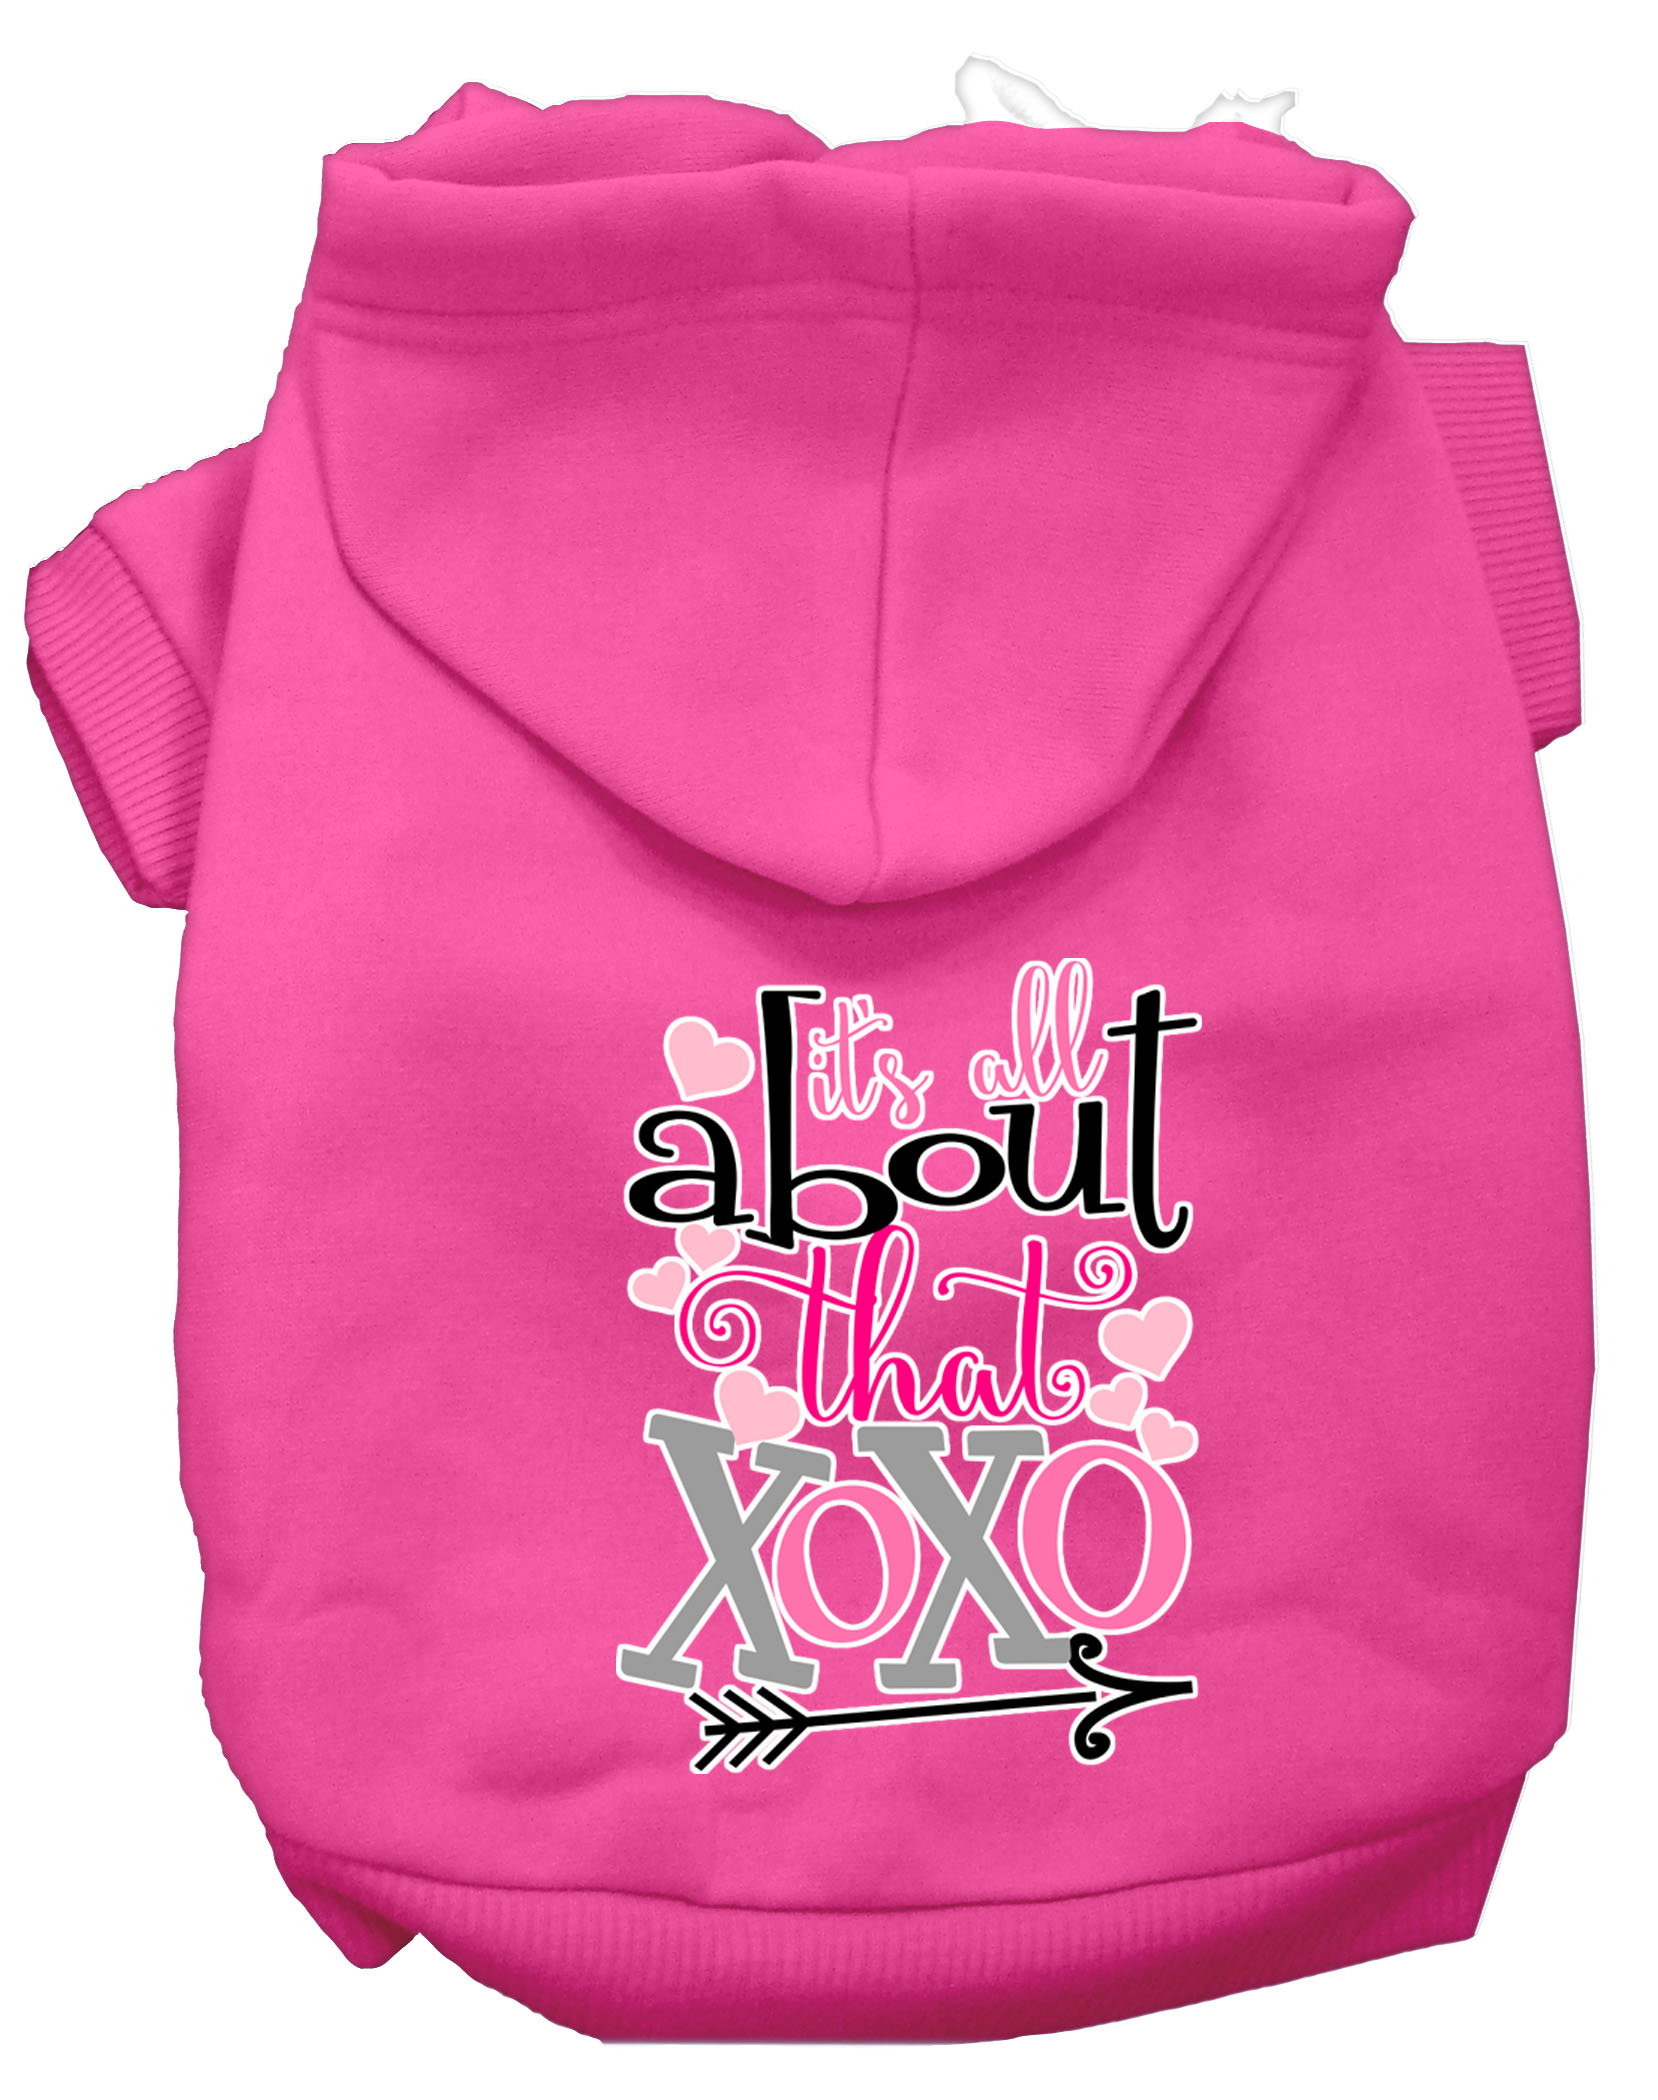 All About that XOXO Screen Print Dog Hoodie Bright Pink L